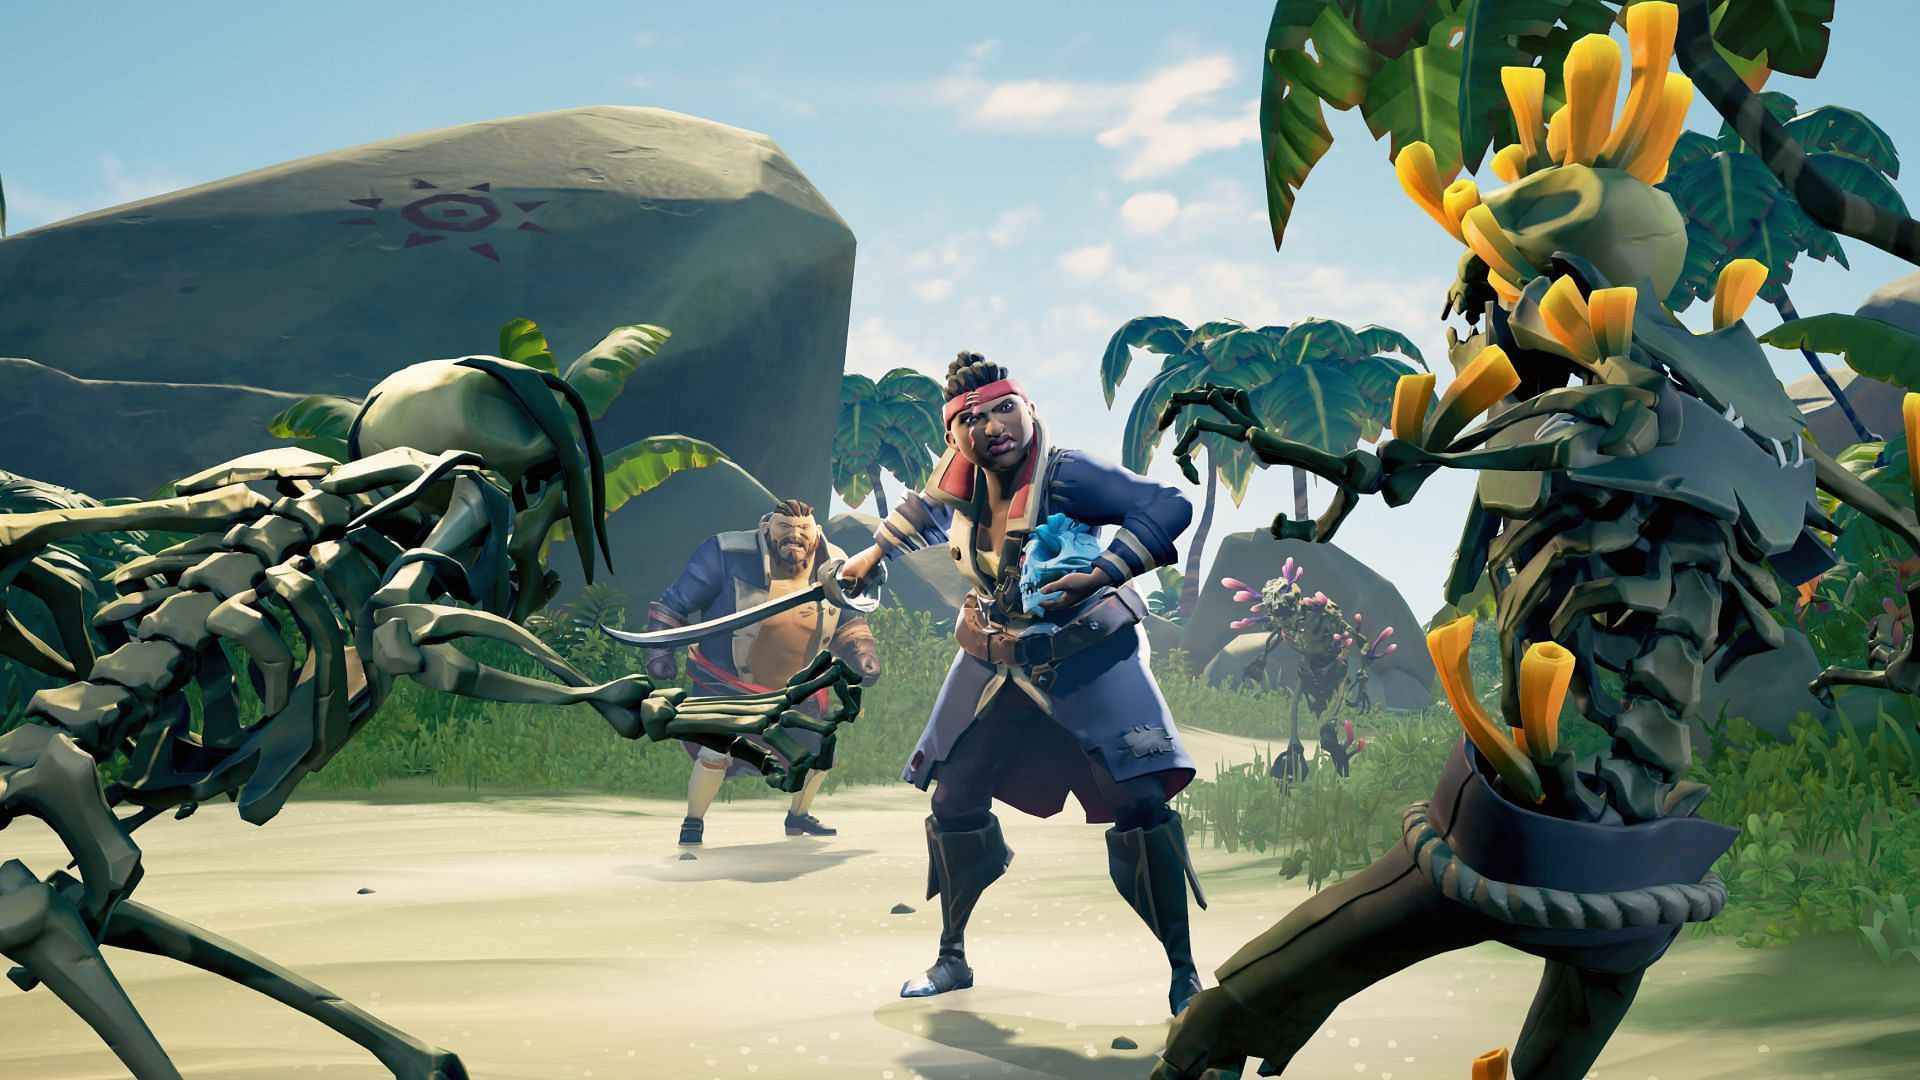 Sea of Thieves 2.9.1 patch notes